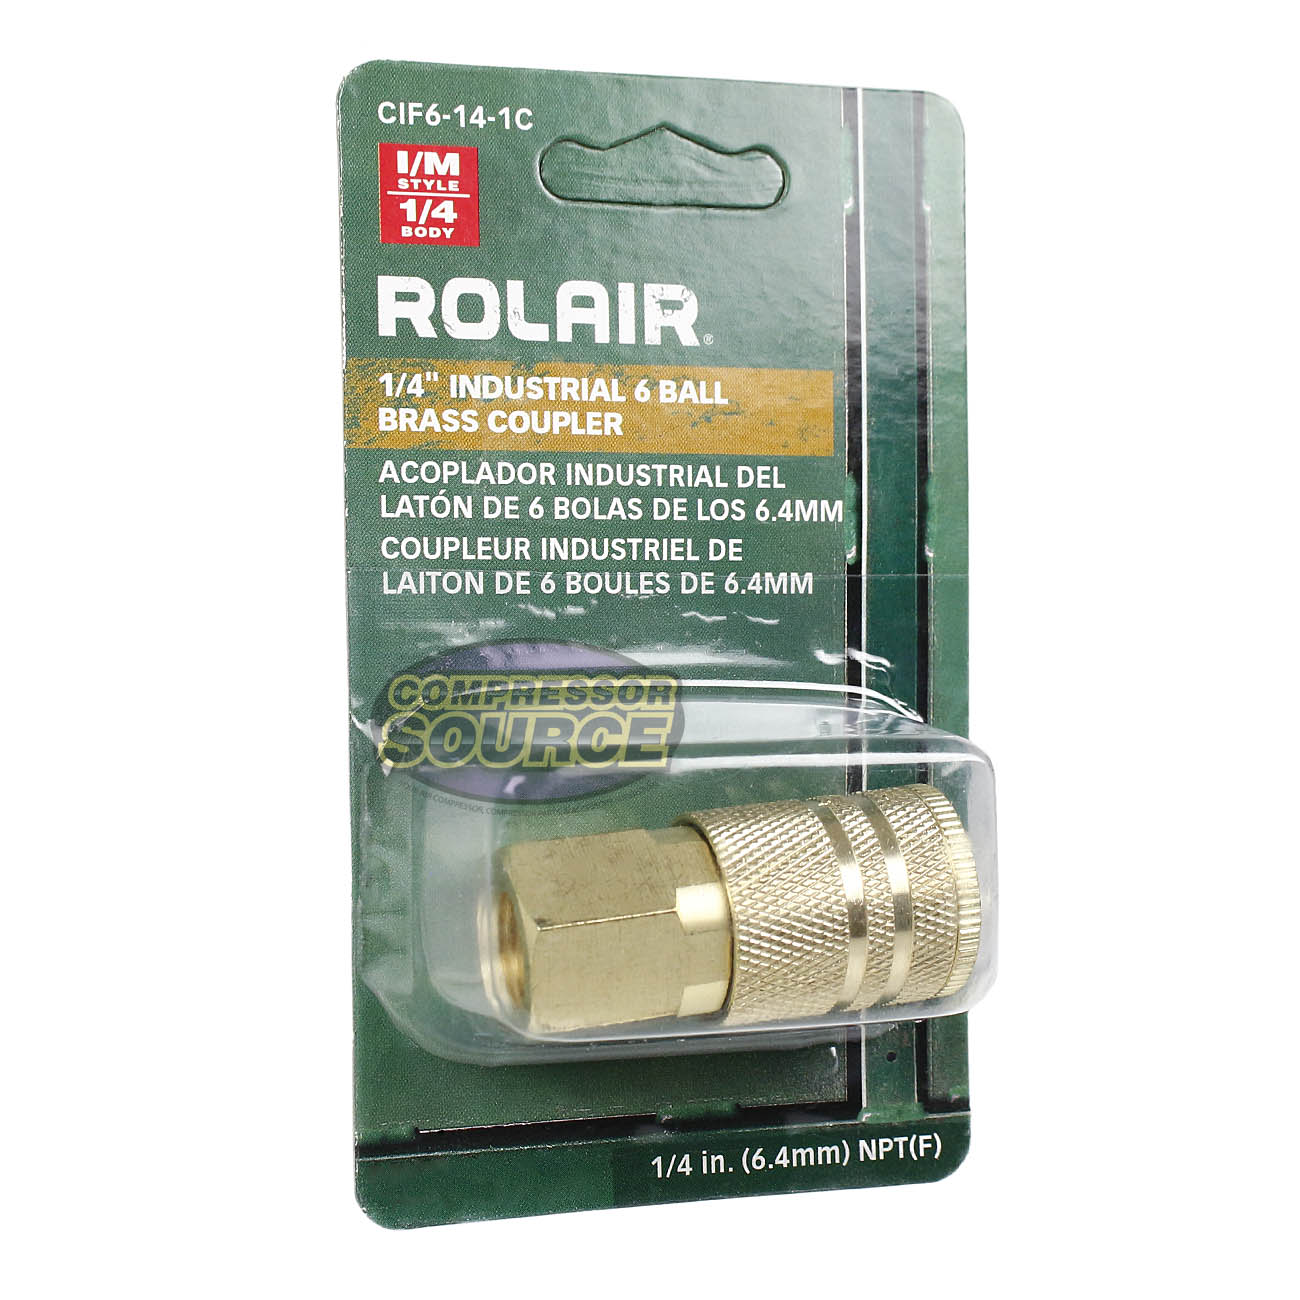 Rolair 1/4" Female Industrial Style 6 Ball Solid Brass Coupler Single CIF6-14-1C